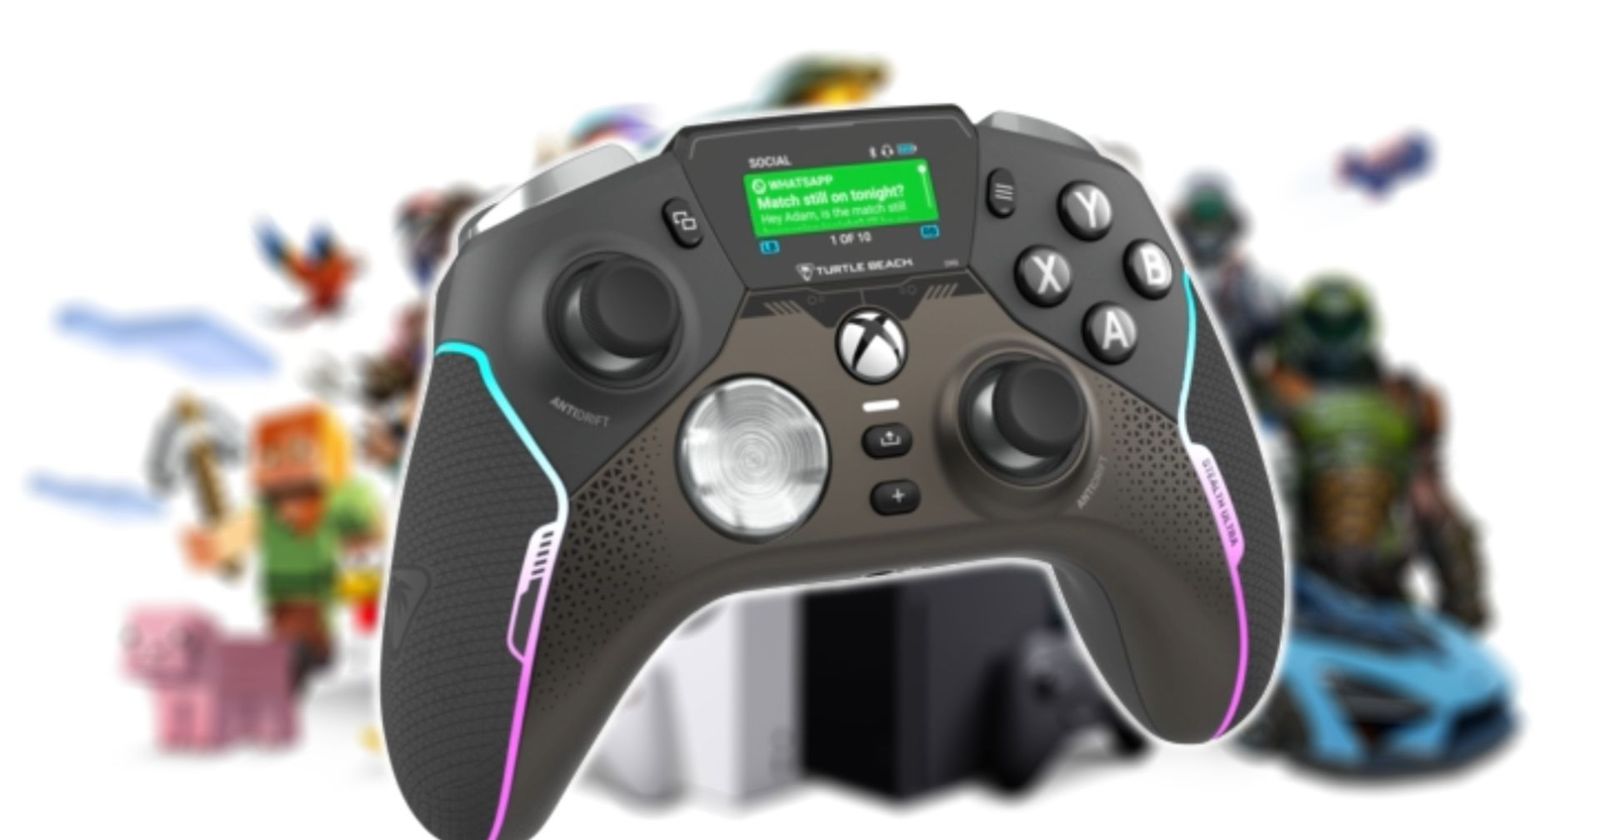 Stealth Ultra Turtle Beach controller has a dashboard gimmick